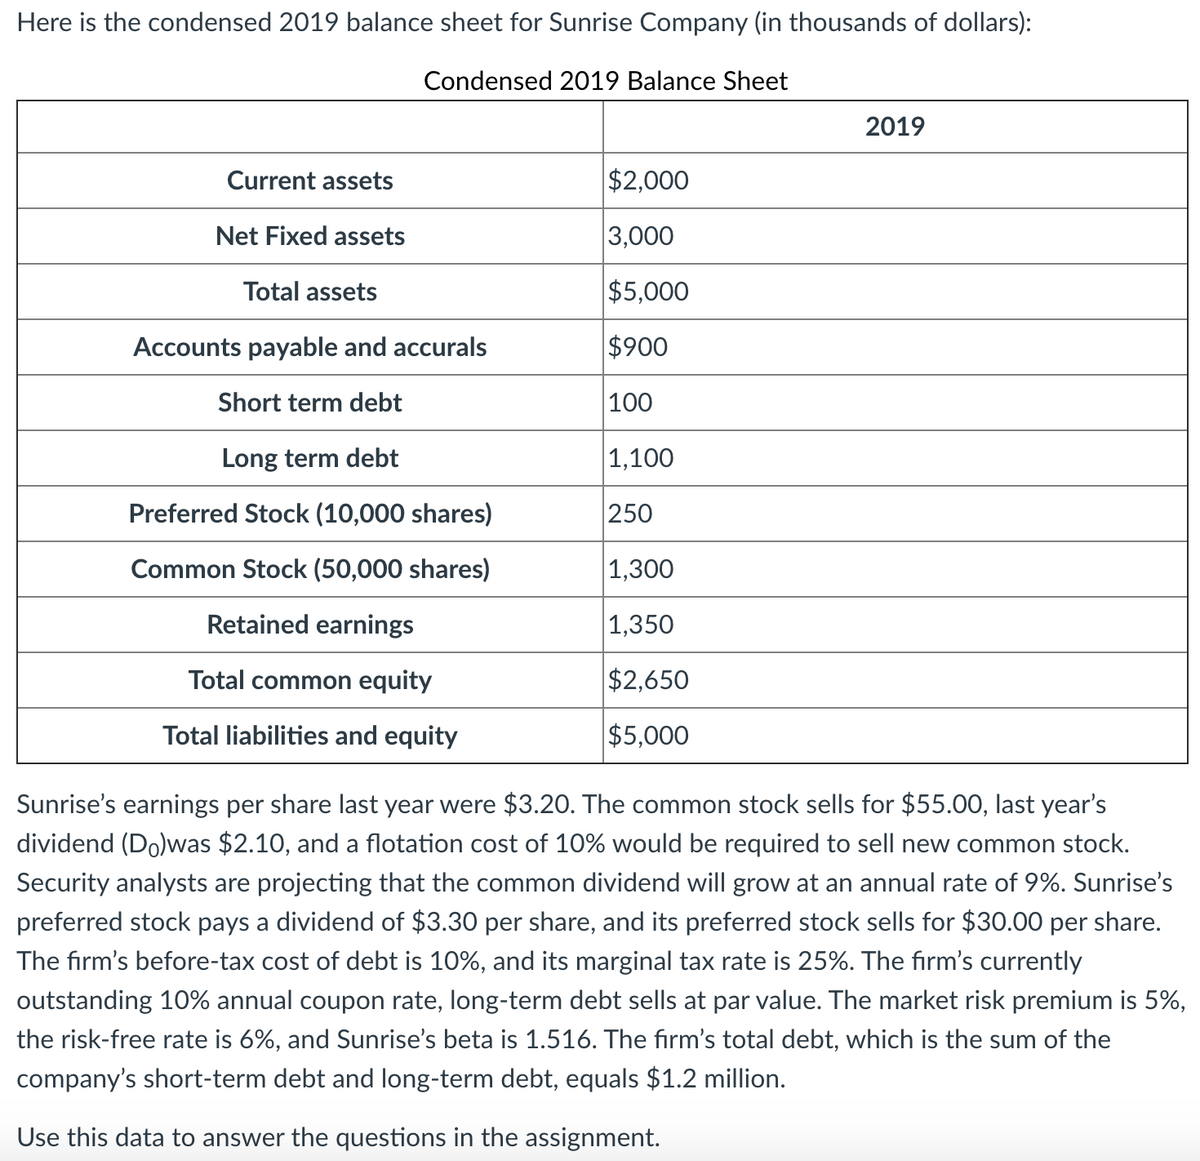 Here is the condensed 2019 balance sheet for Sunrise Company (in thousands of dollars):
Condensed 2019 Balance Sheet
2019
Current assets
$2,000
Net Fixed assets
3,000
Total assets
$5,000
Accounts payable and accurals
$900
Short term debt
100
Long term debt
|1,100
Preferred Stock (10,000 shares)
250
Common Stock (50,000 shares)
|1,300
Retained earnings
|1,350
Total common equity
$2,650
Total liabilities and equity
$5,000
Sunrise's earnings per share last year were $3.20. The common stock sells for $55.00, last year's
dividend (Do)was $2.10, and a flotation cost of 10% would be required to sell new common stock.
Security analysts are projecting that the common dividend will grow at an annual rate of 9%. Sunrise's
preferred stock pays a dividend of $3.30 per share, and its preferred stock sells for $30.00 per share.
The firm's before-tax cost of debt is 10%, and its marginal tax rate is 25%. The firm's currently
outstanding 10% annual coupon rate, long-term debt sells at par value. The market risk premium is 5%,
the risk-free rate is 6%, and Sunrise's beta is 1.516. The firm's total debt, which is the sum of the
company's short-term debt and long-term debt, equals $1.2 million.
Use this data to answer the questions in the assignment.
